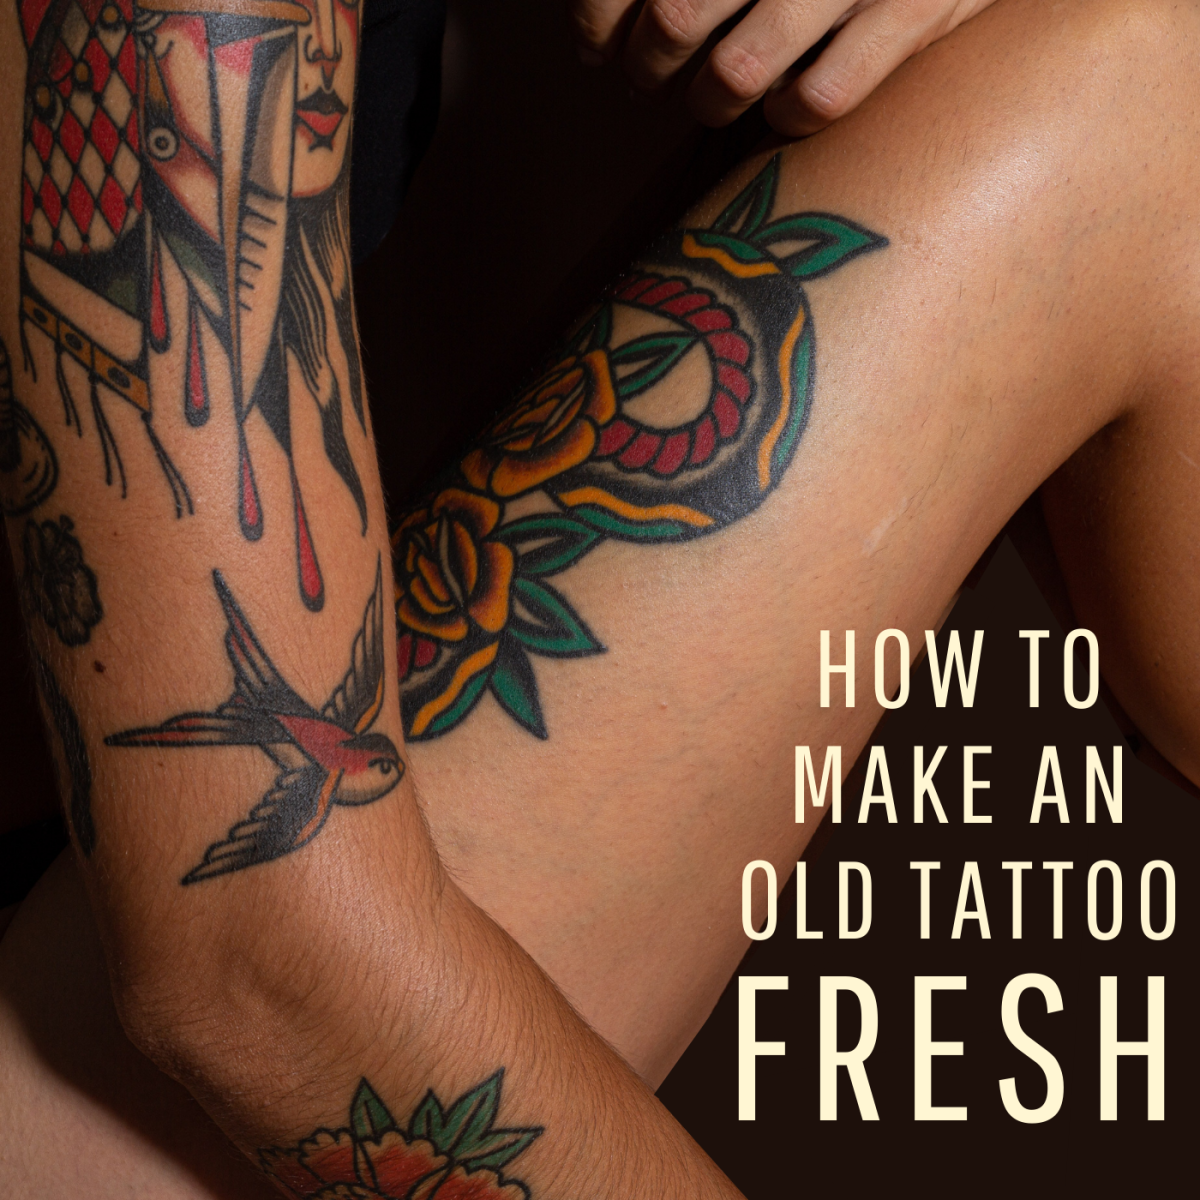 Faded tattoo ideas that will look great into old age